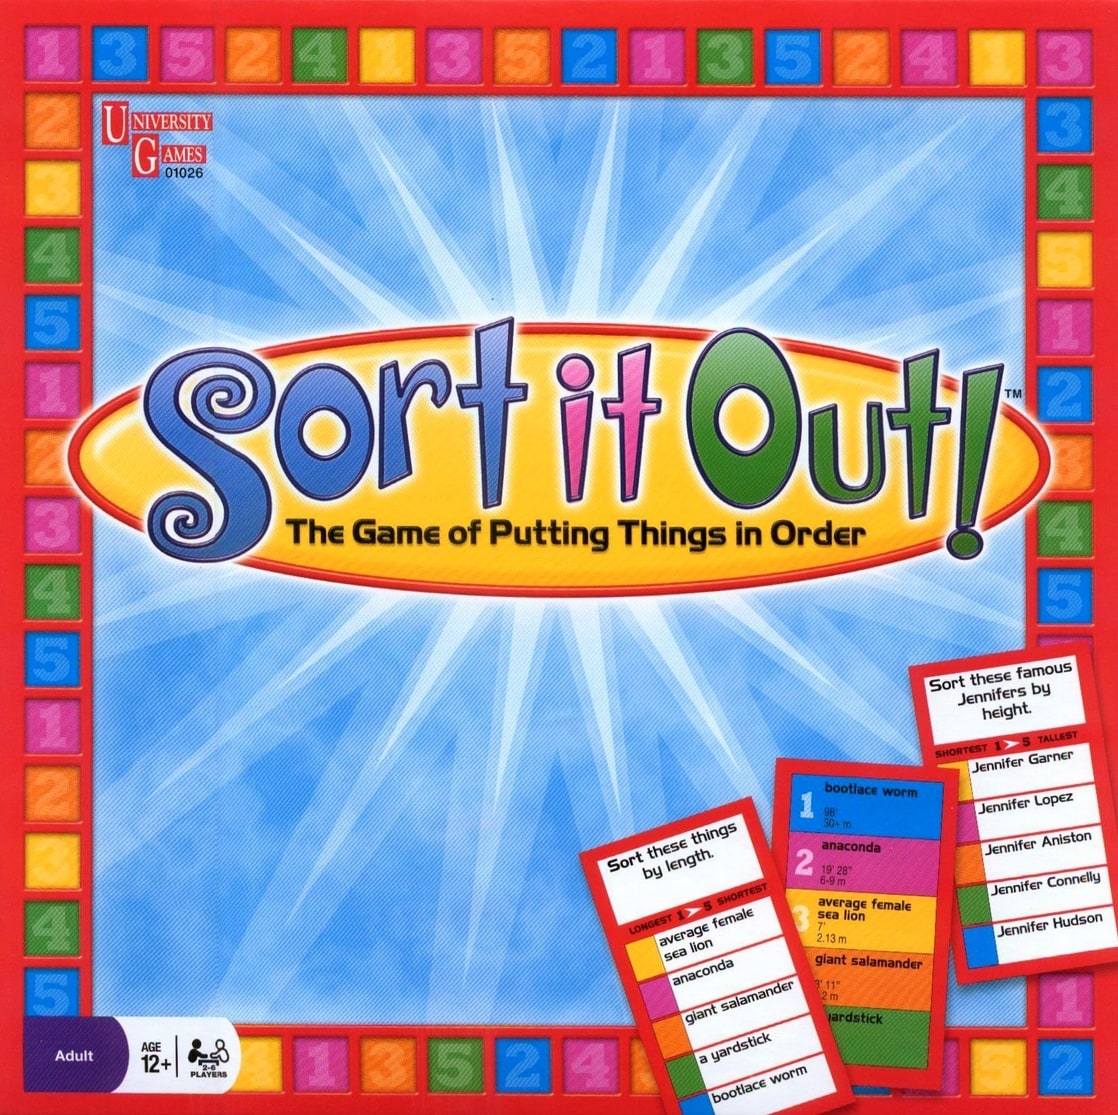 Sort it Out!: The Game of Putting Things in Order